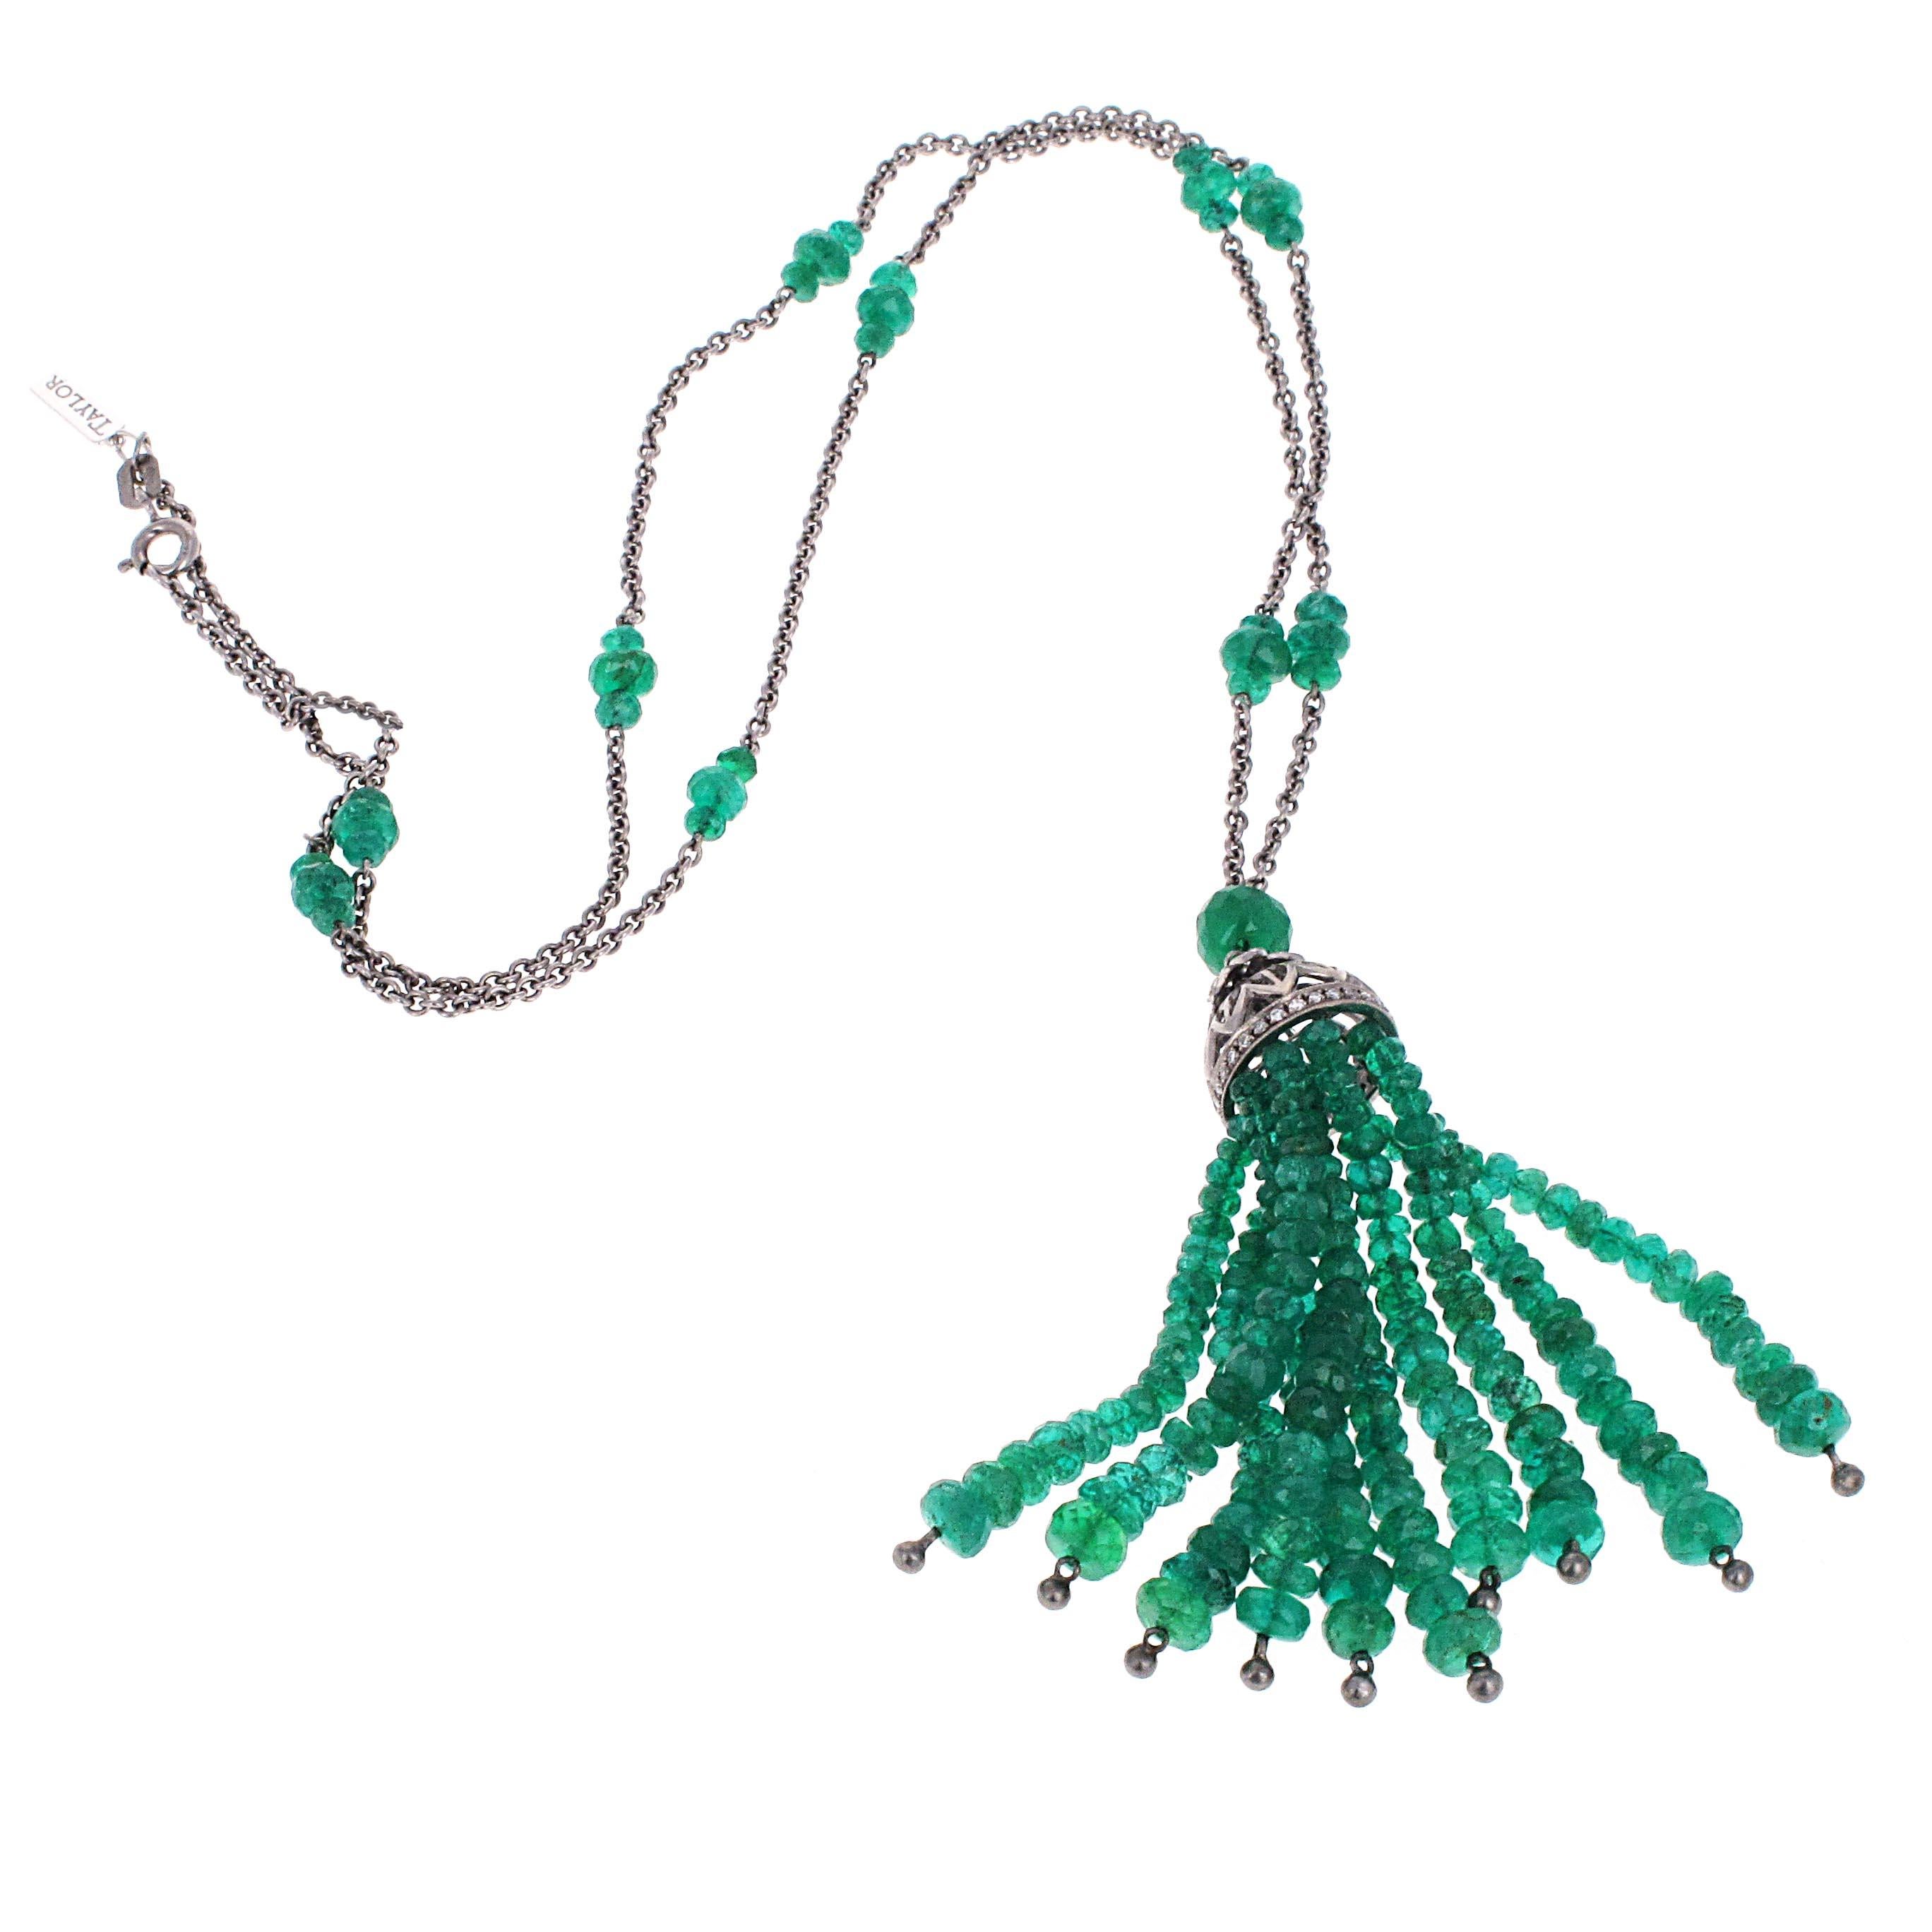 18k white gold  emerald and diamond tassel necklace from the Elizabeth Taylor collection. This necklace is not only extremely well made, but also super cool. The tassels move when you move and it is a fun piece that can be worn up or worn down. The